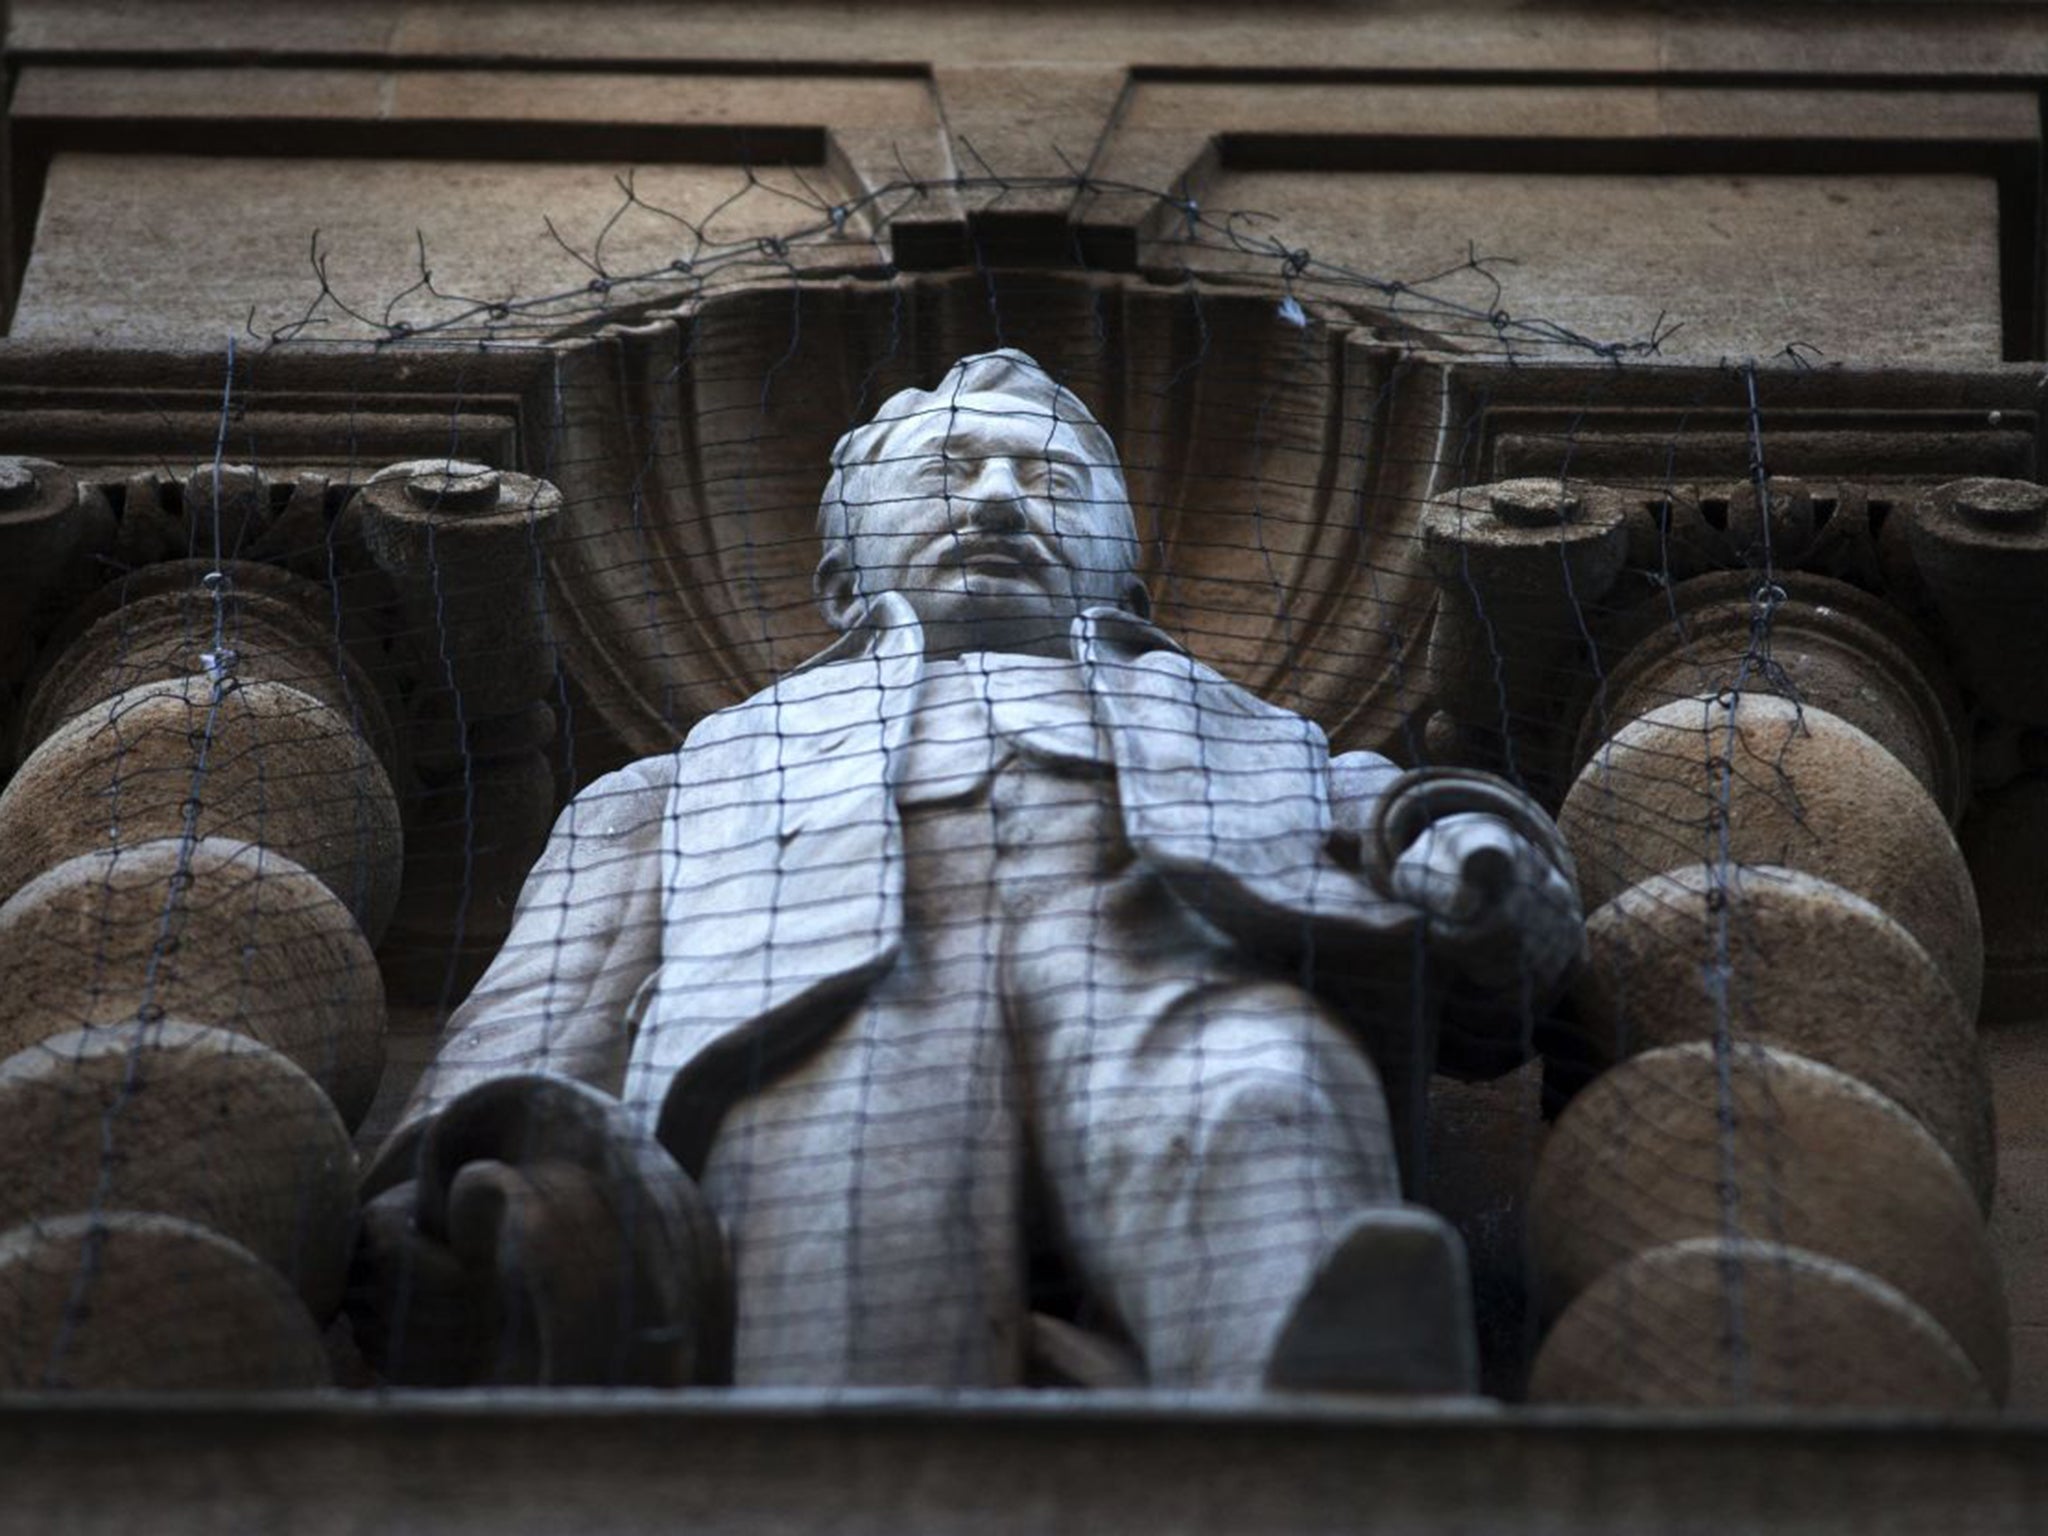 Cecil Rhodes: How Black Lives Matter and Bristolian vandalism renewed hope that Oxford's imperialist benefactor could fall